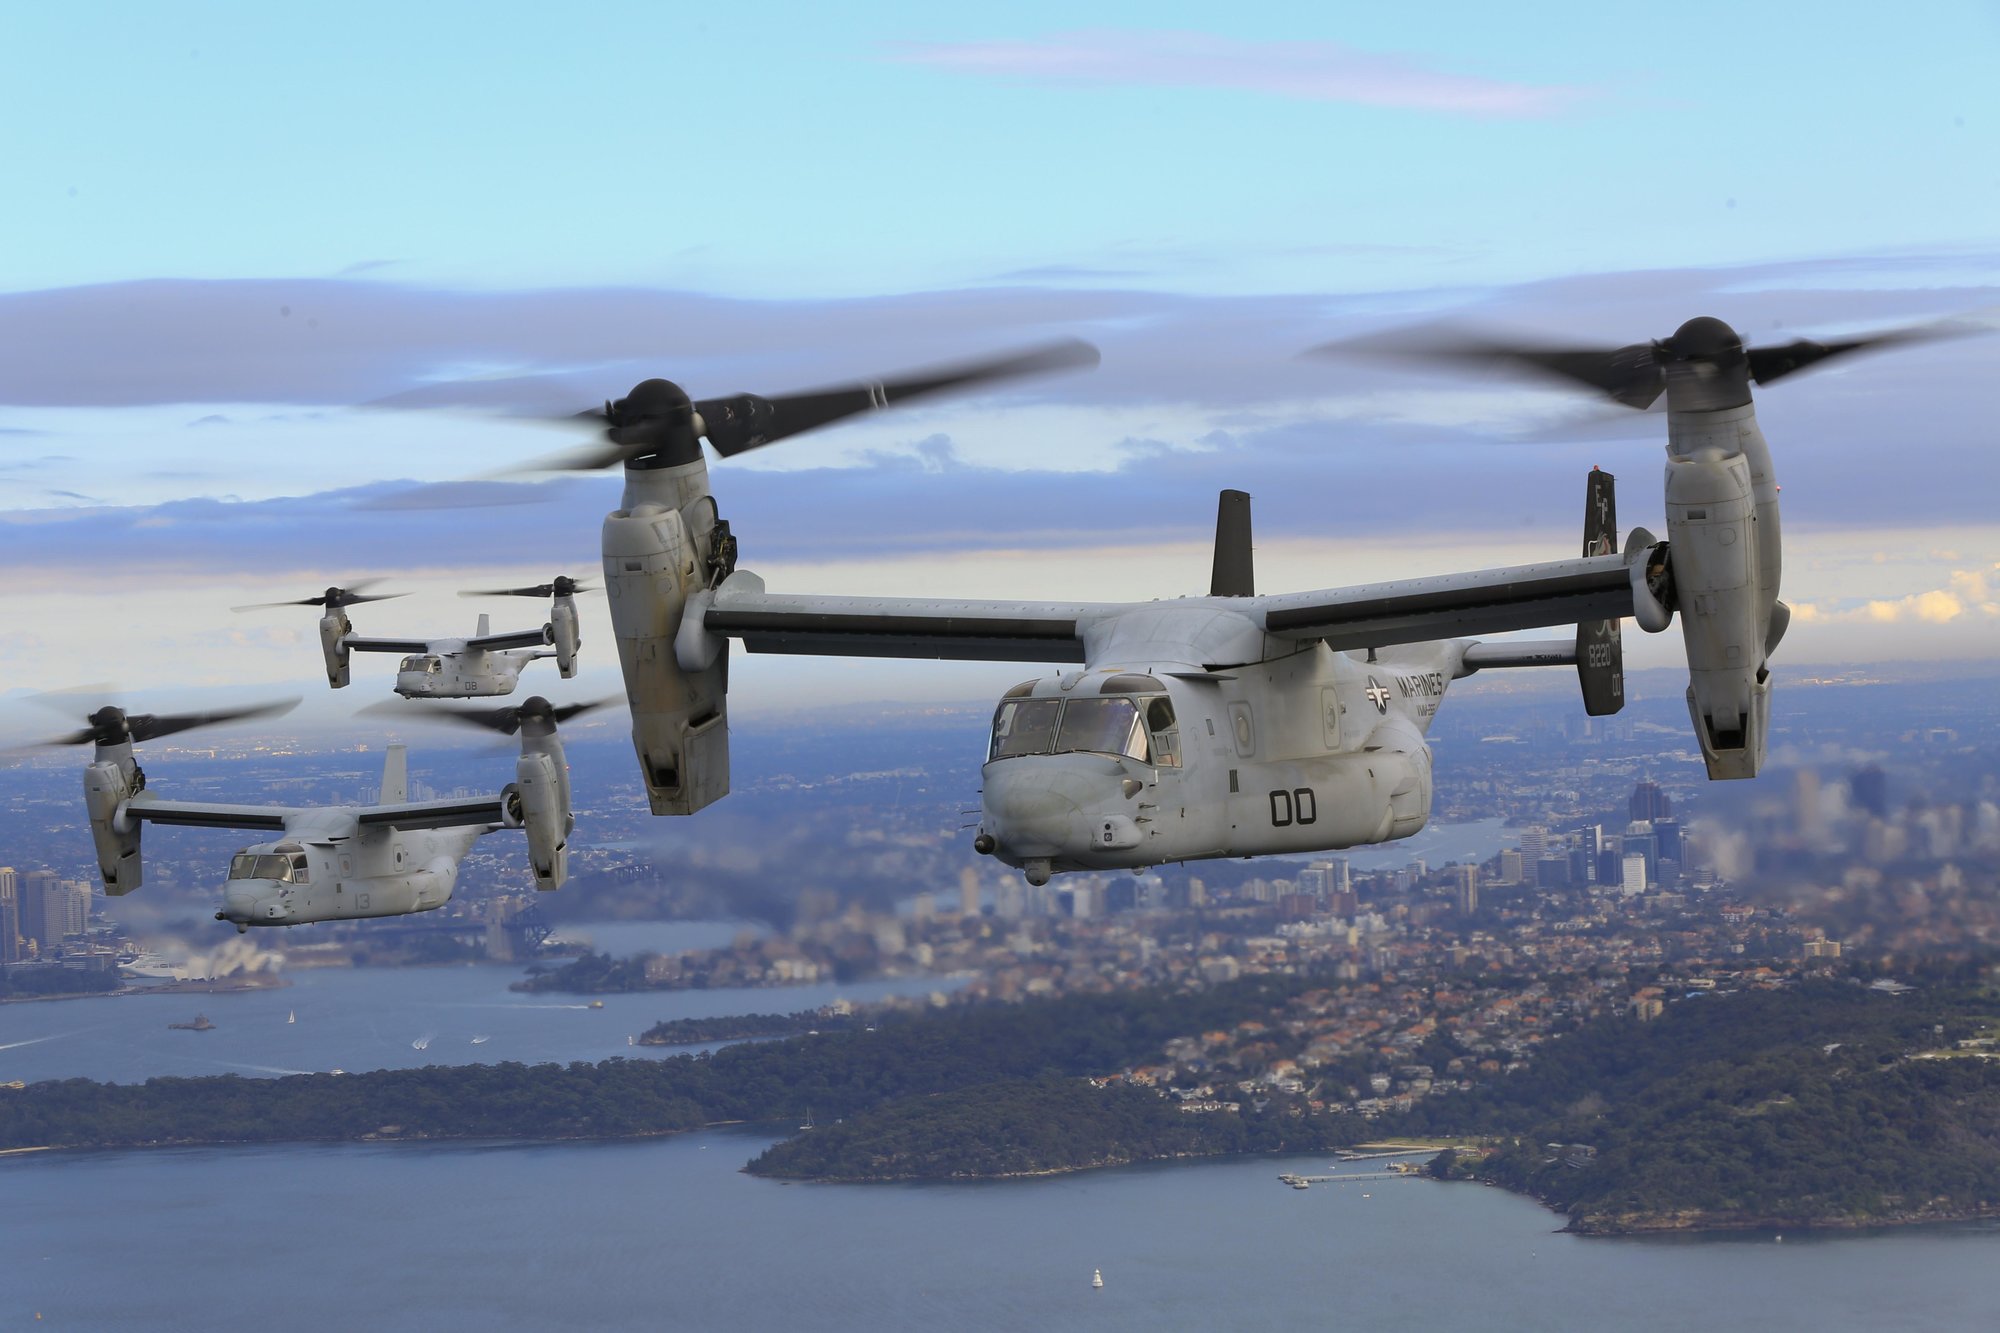 The MV-22 Osprey’s mission for the US Marine Corps is the transportation of troops, equipment, and supplies from ships and land bases for combat assault and assault support. US Navy photo.